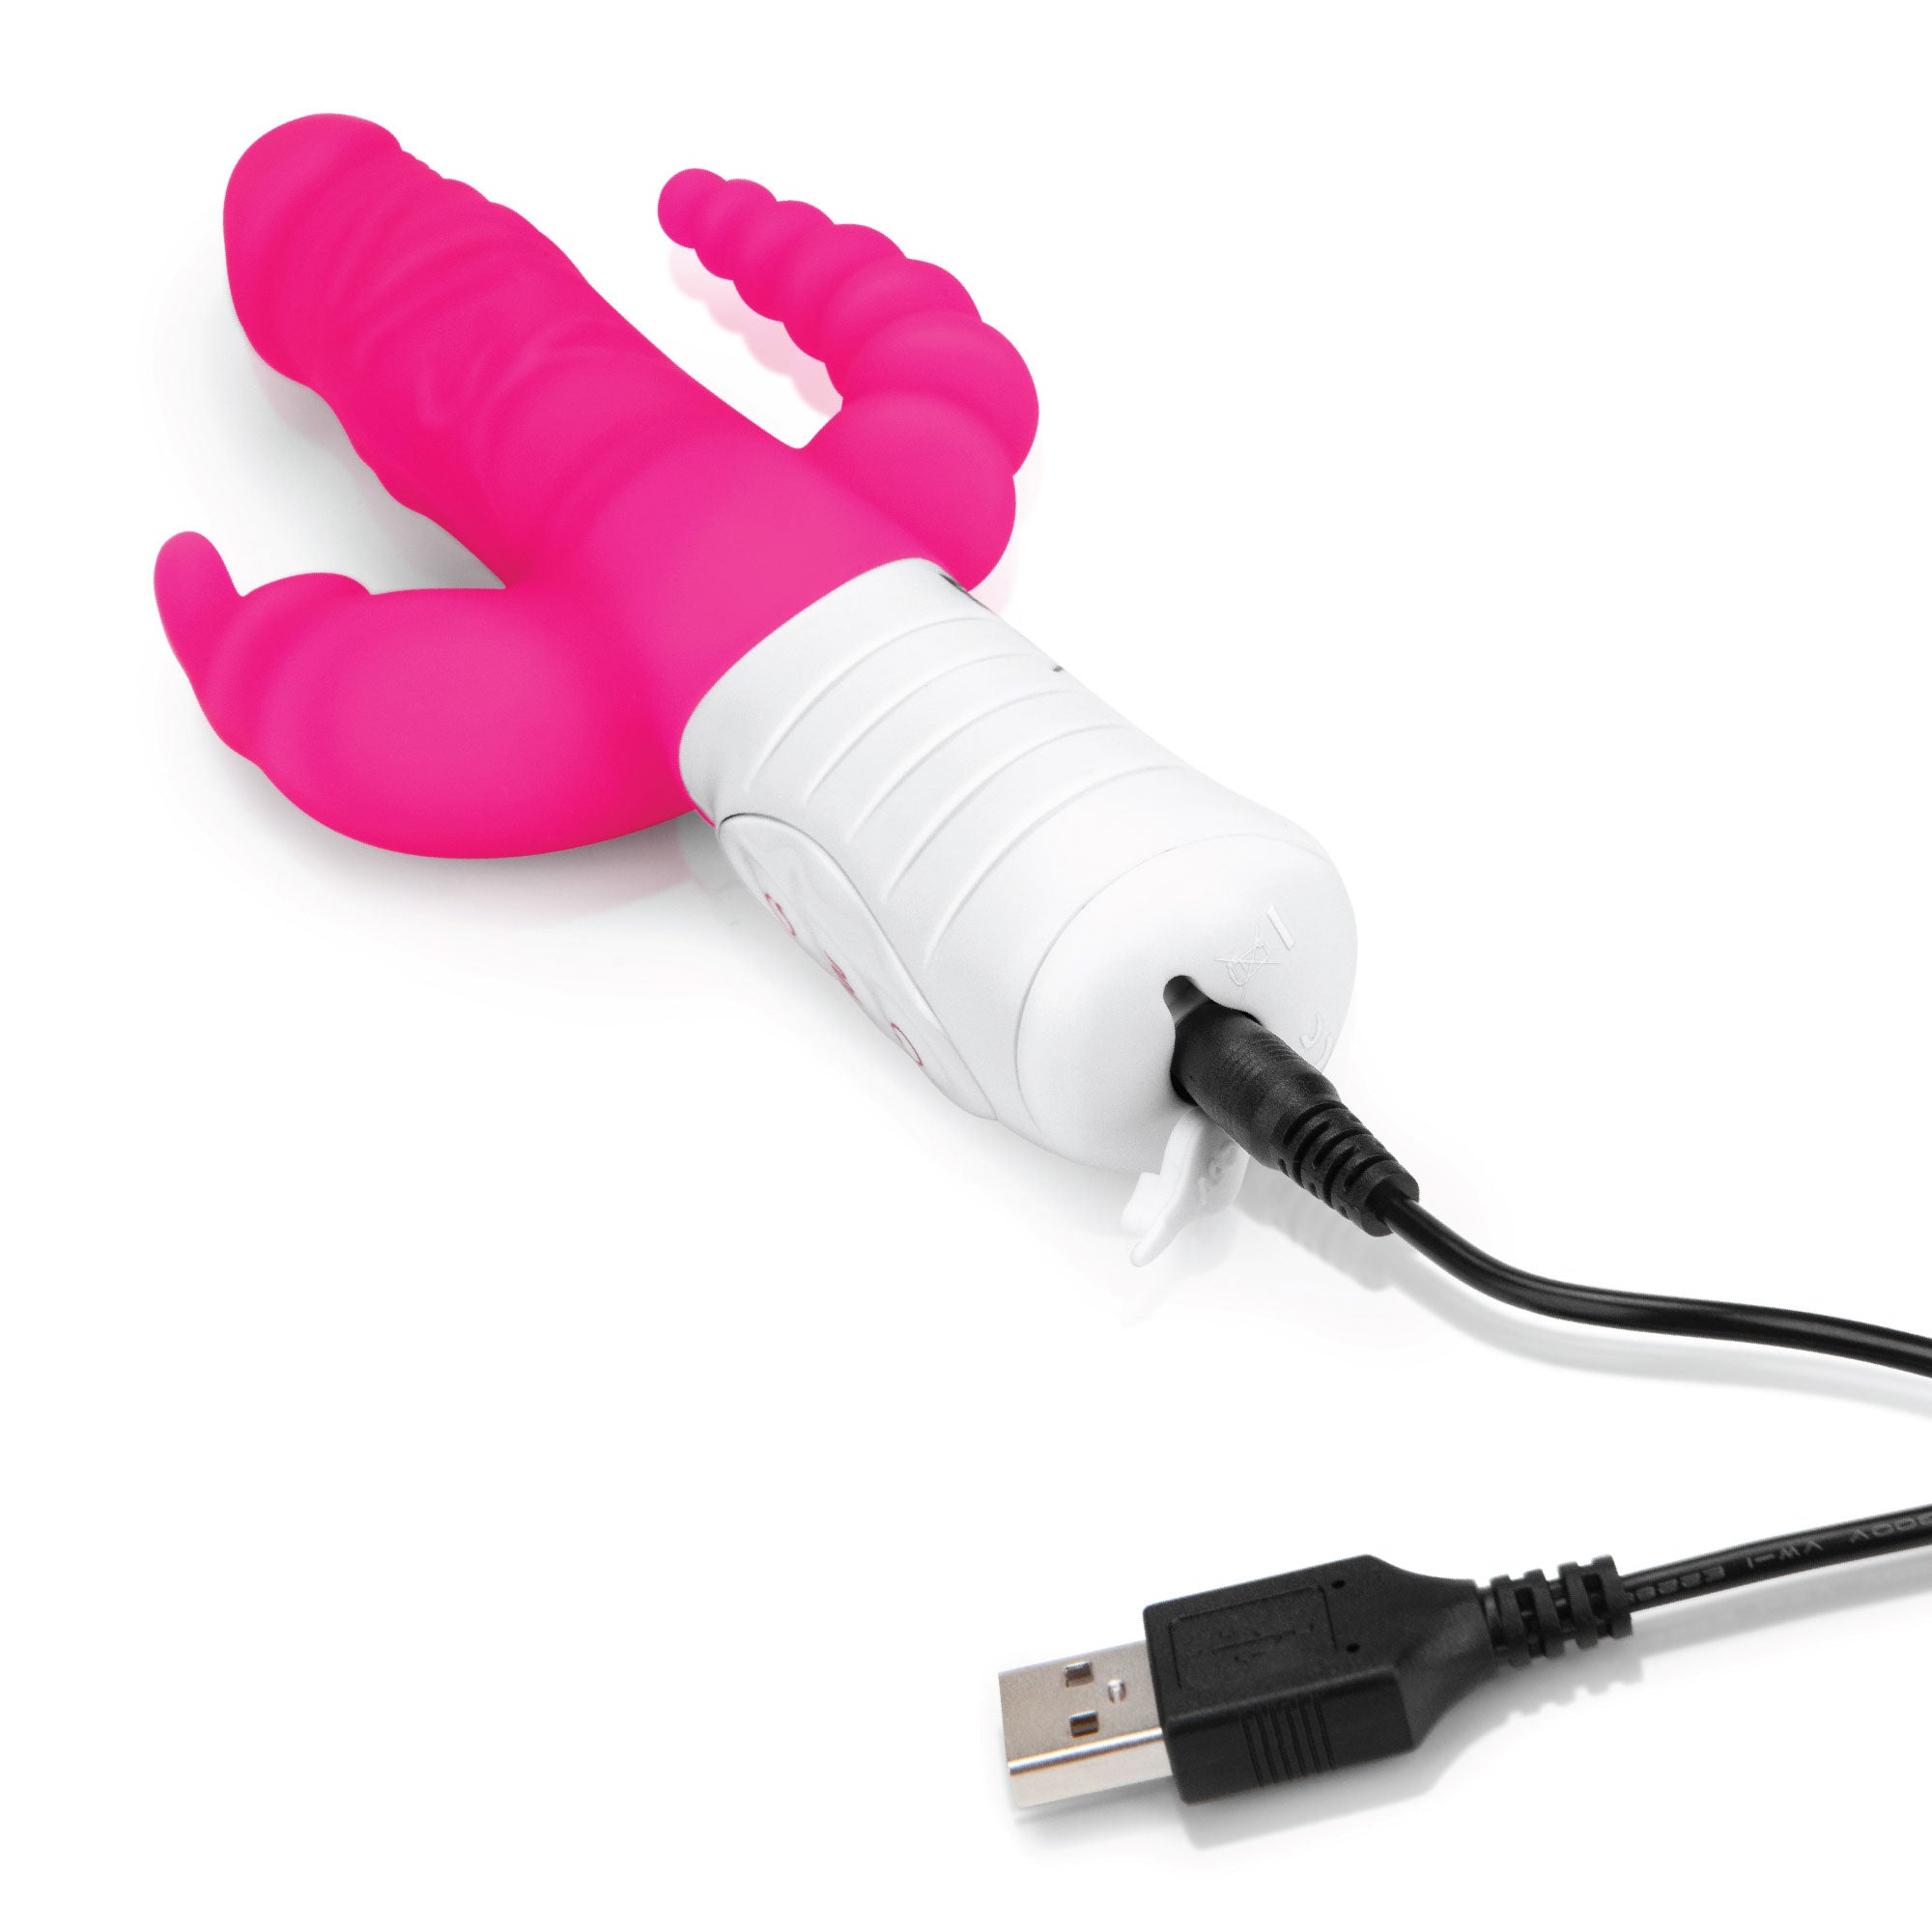 Rabbit Essentials Slim Realistic Double Penetration Rabbit Vibrator with Rotating Beads in Pink with Charging Cable at glastoy.com